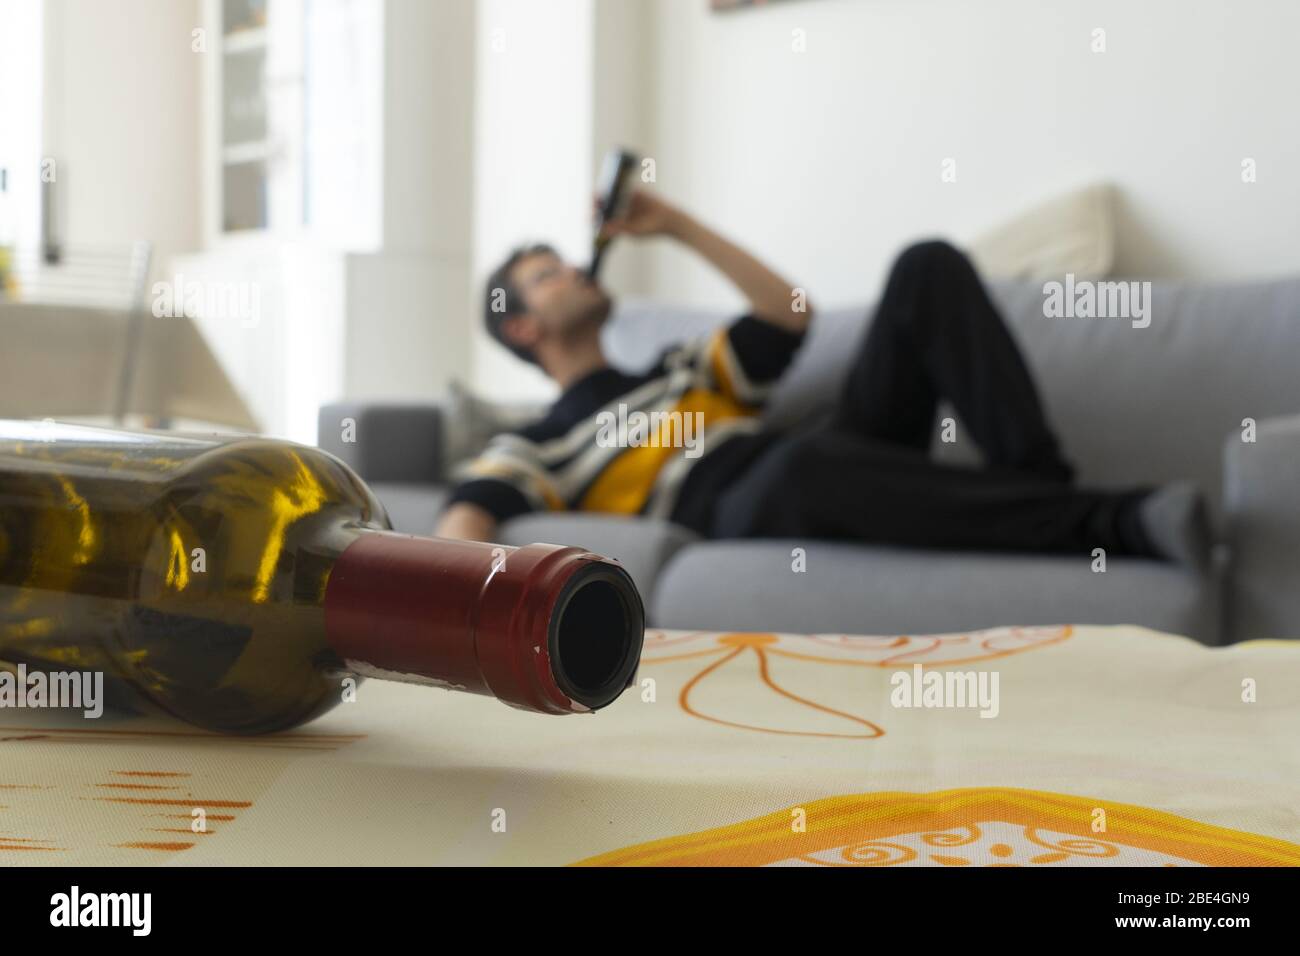 Alcoholic man gets drunk on the sofa at home in the background. Empty bottle of wine in the foreground. Family alcoholism concept. Stock Photo